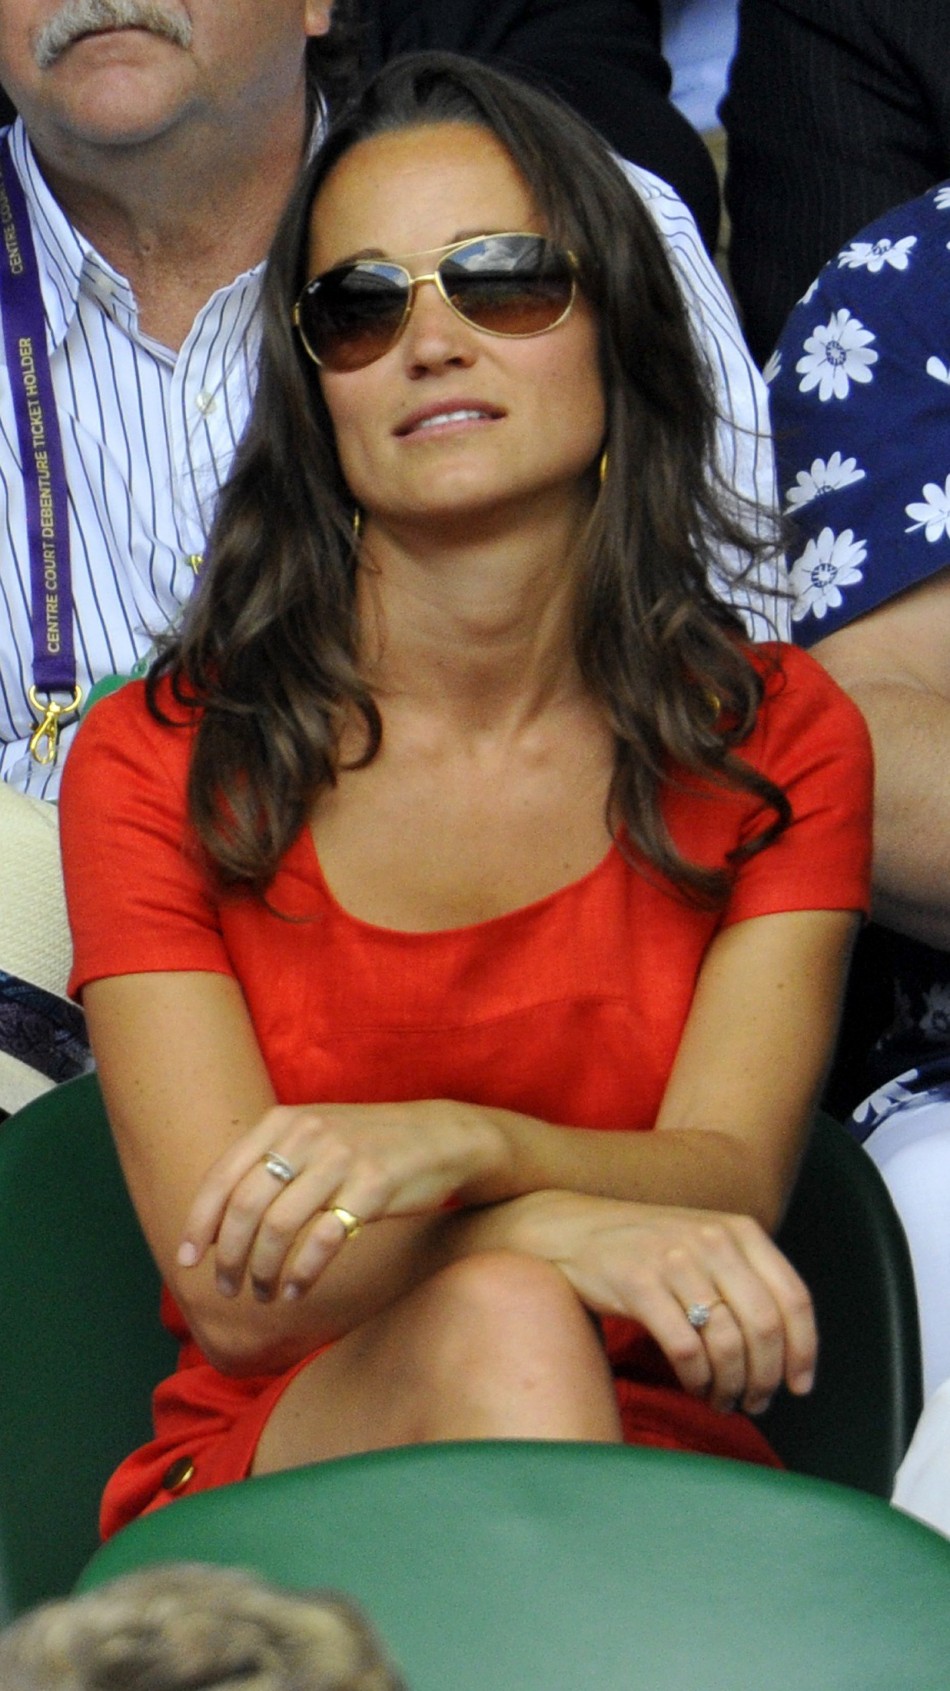 Pippa Middleton, Sister of Catherine, Duchess of Cambridge